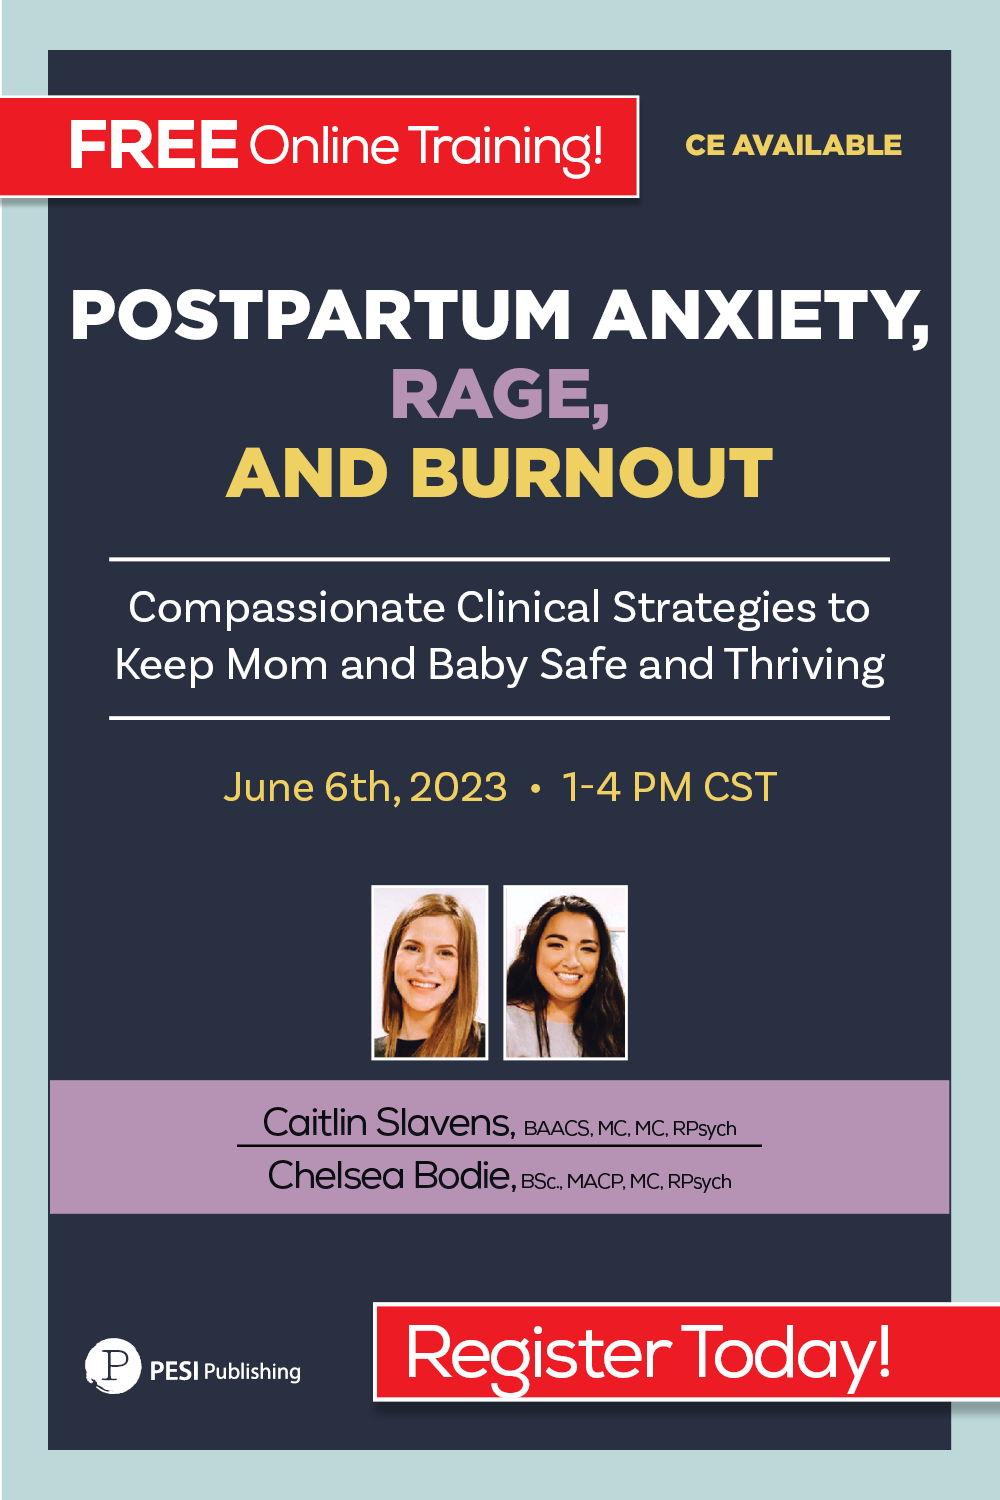 Postpartum Anxiety, Rage, and Burnout Training